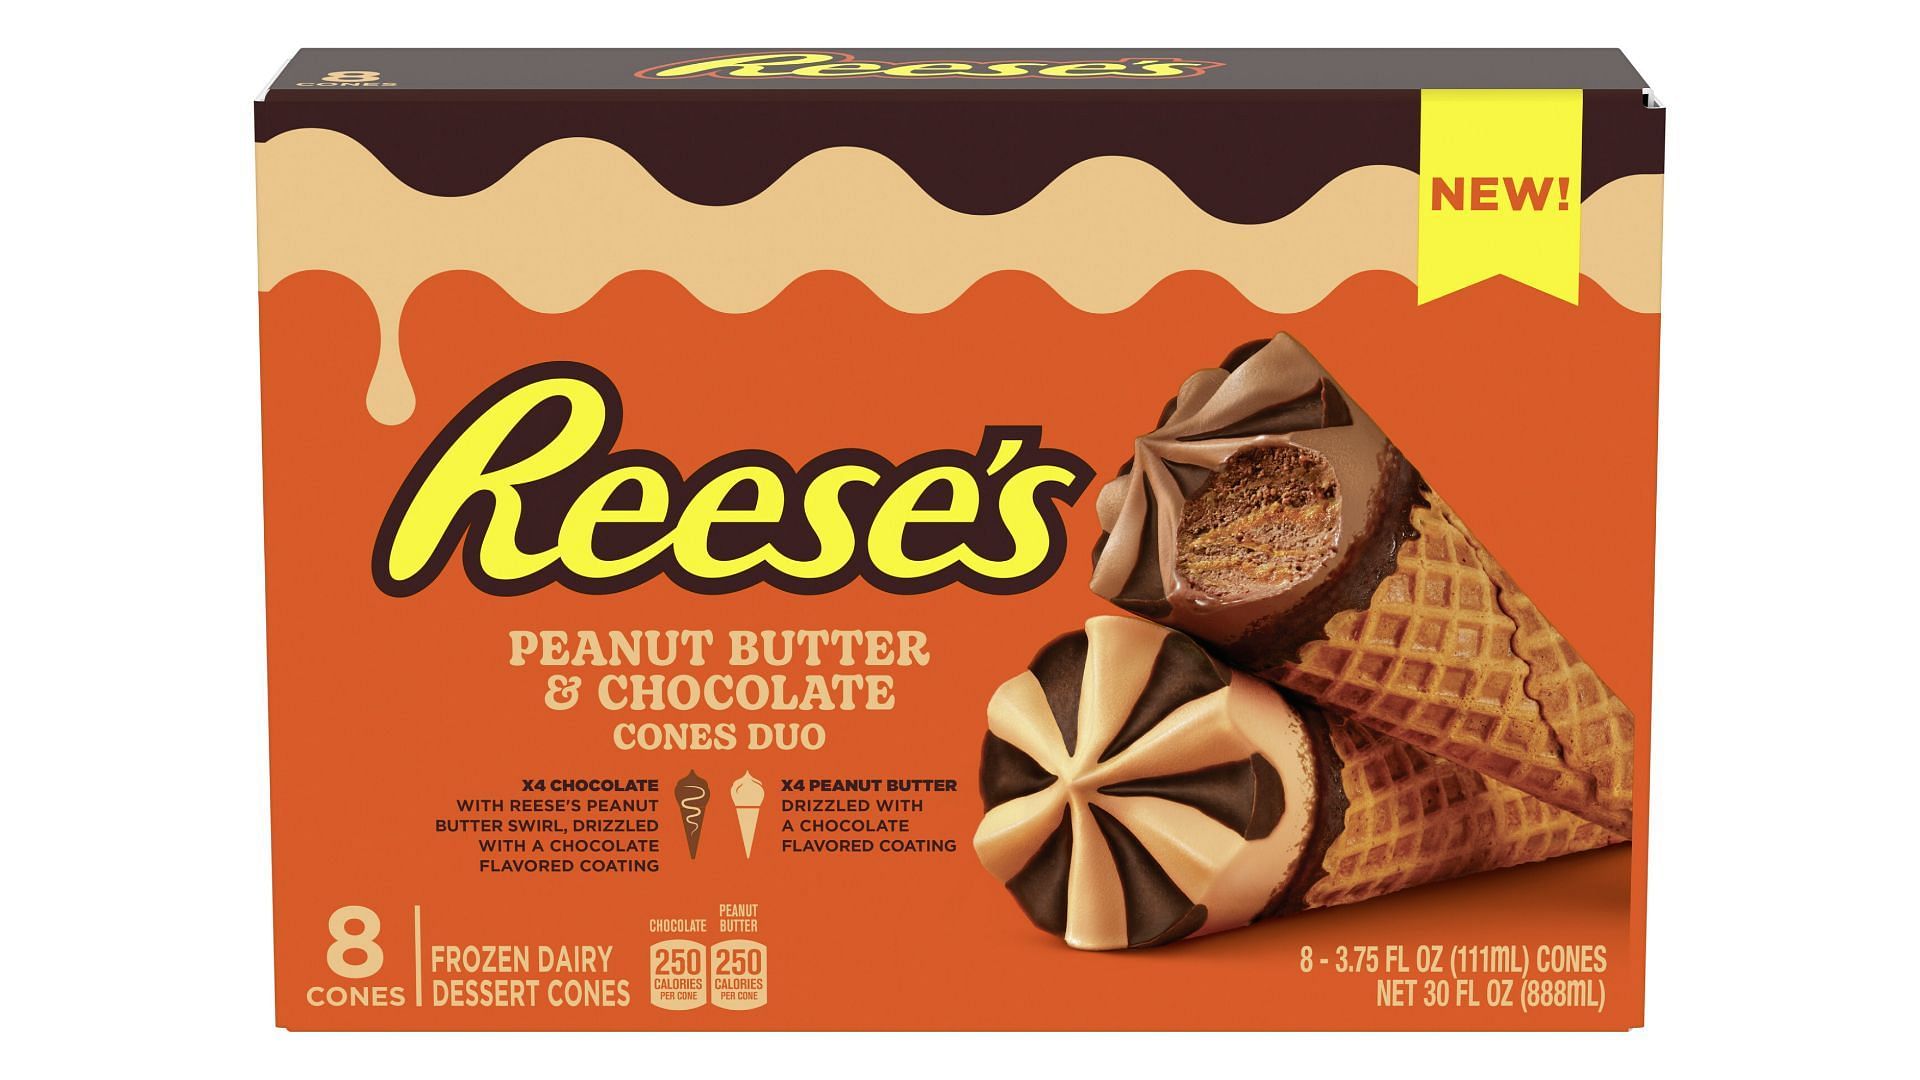 8-pack Peanut Butter and Chocolate Cones (Image via Unilever Ice Creams)